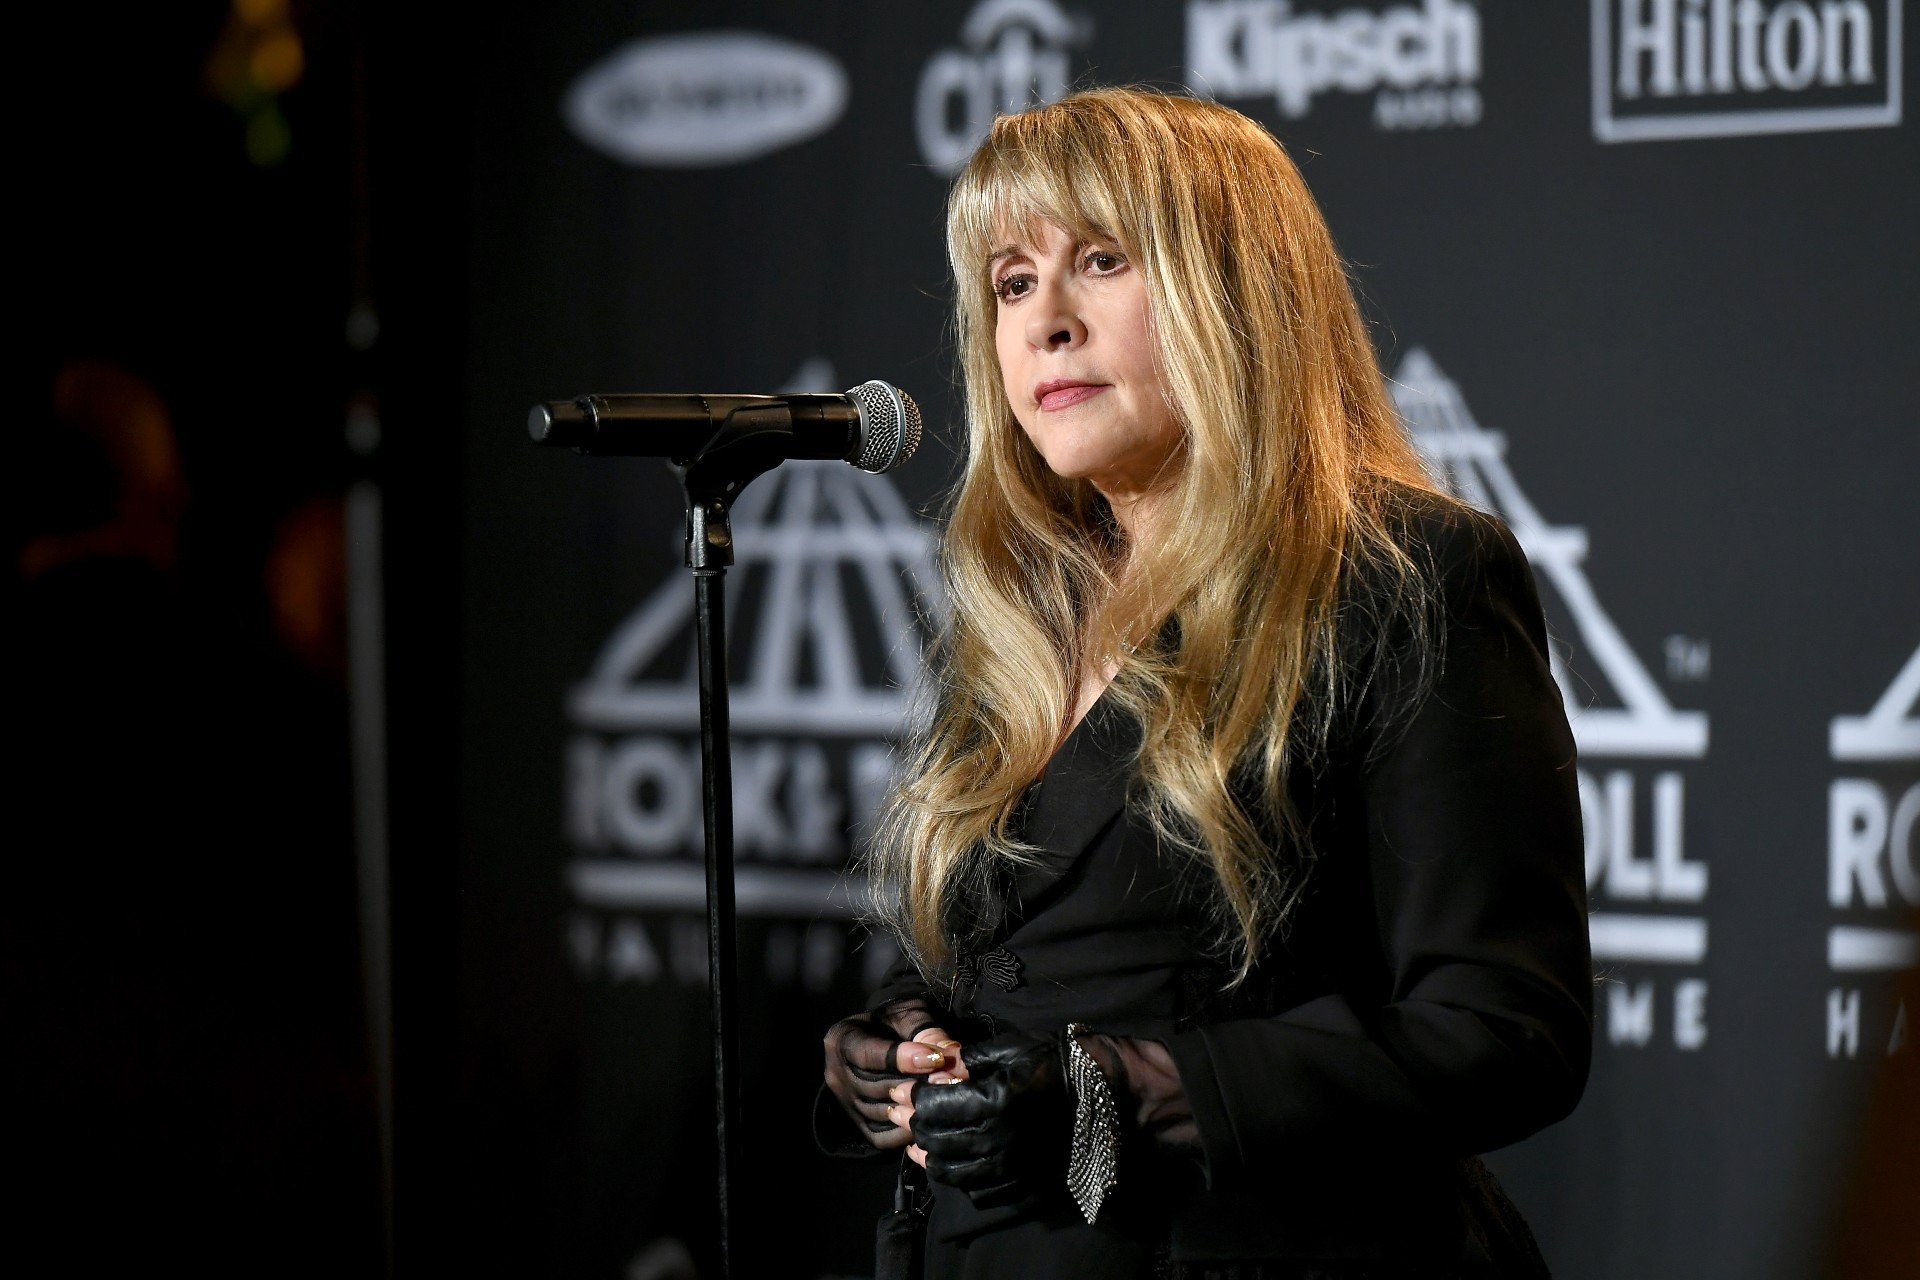 Stevie Nicks holds a microphone while performing in a black outfit.